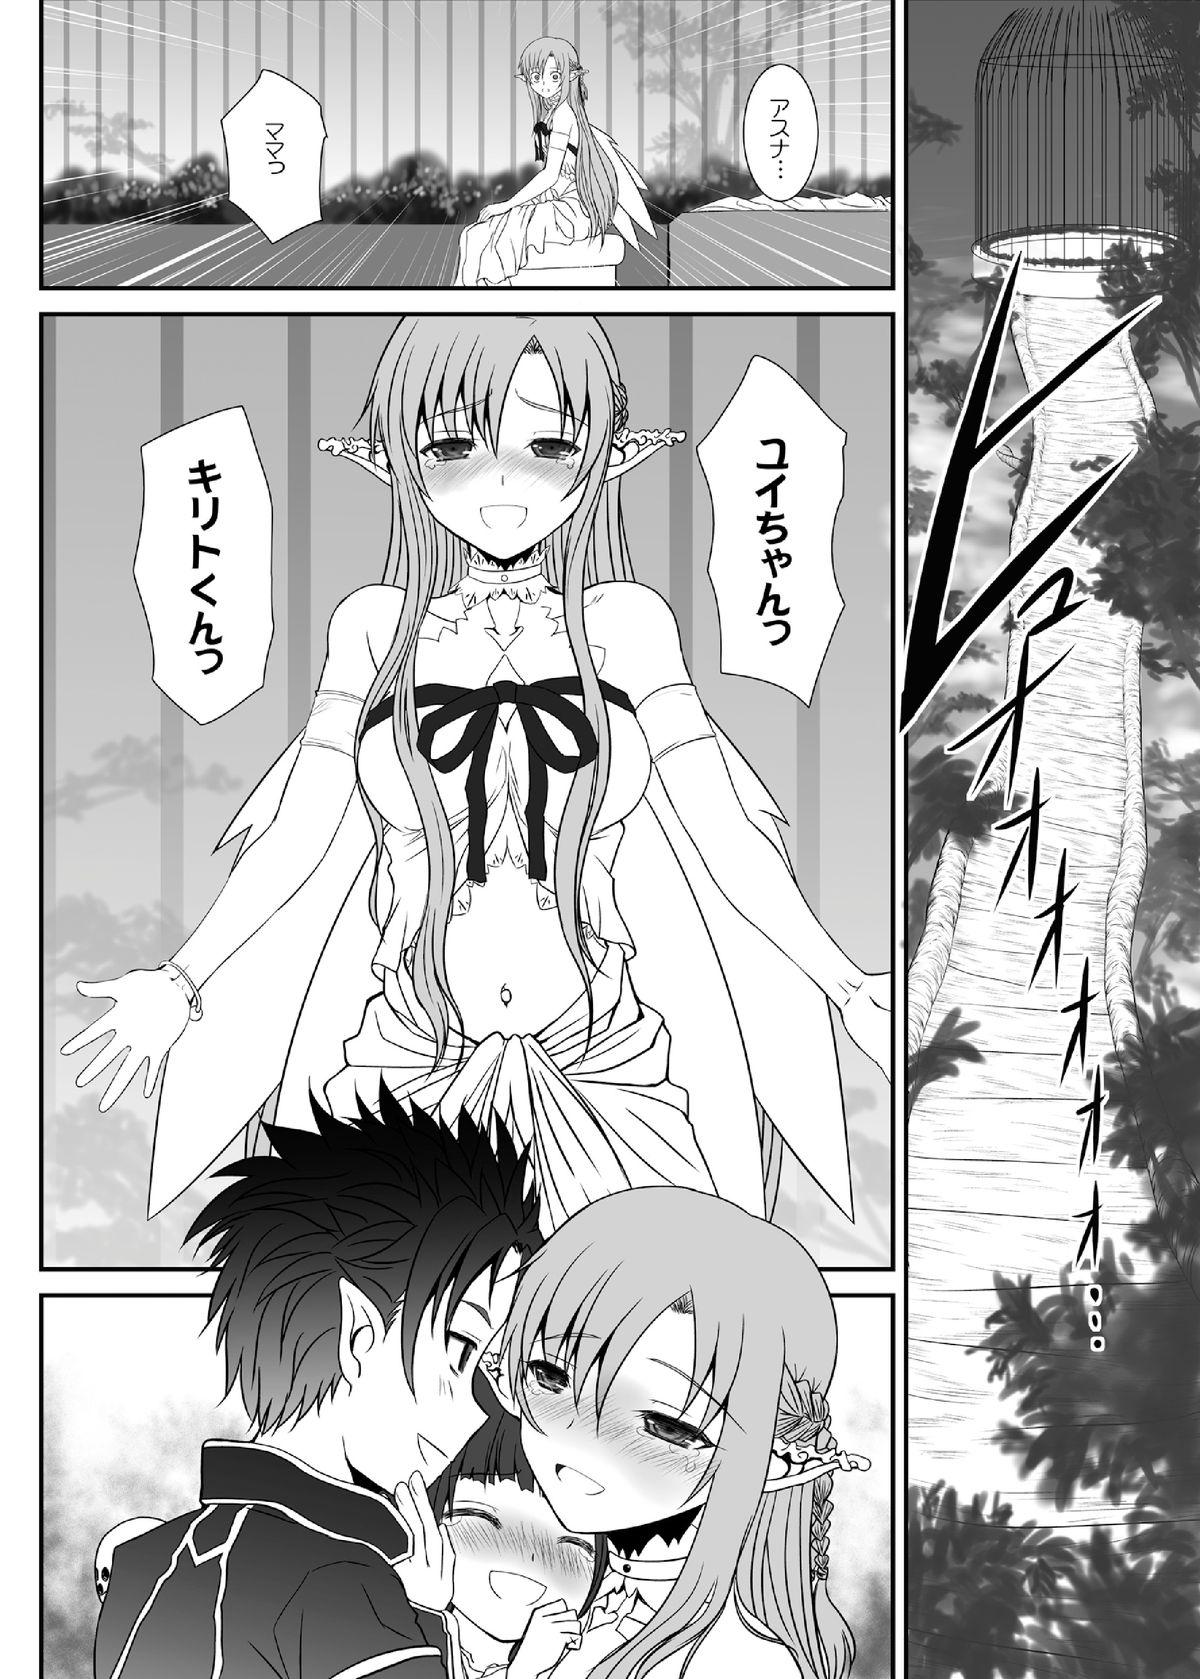 Pervs Slave Asuna On-Demand 2 - Sword art online Tight Cunt - Page 5